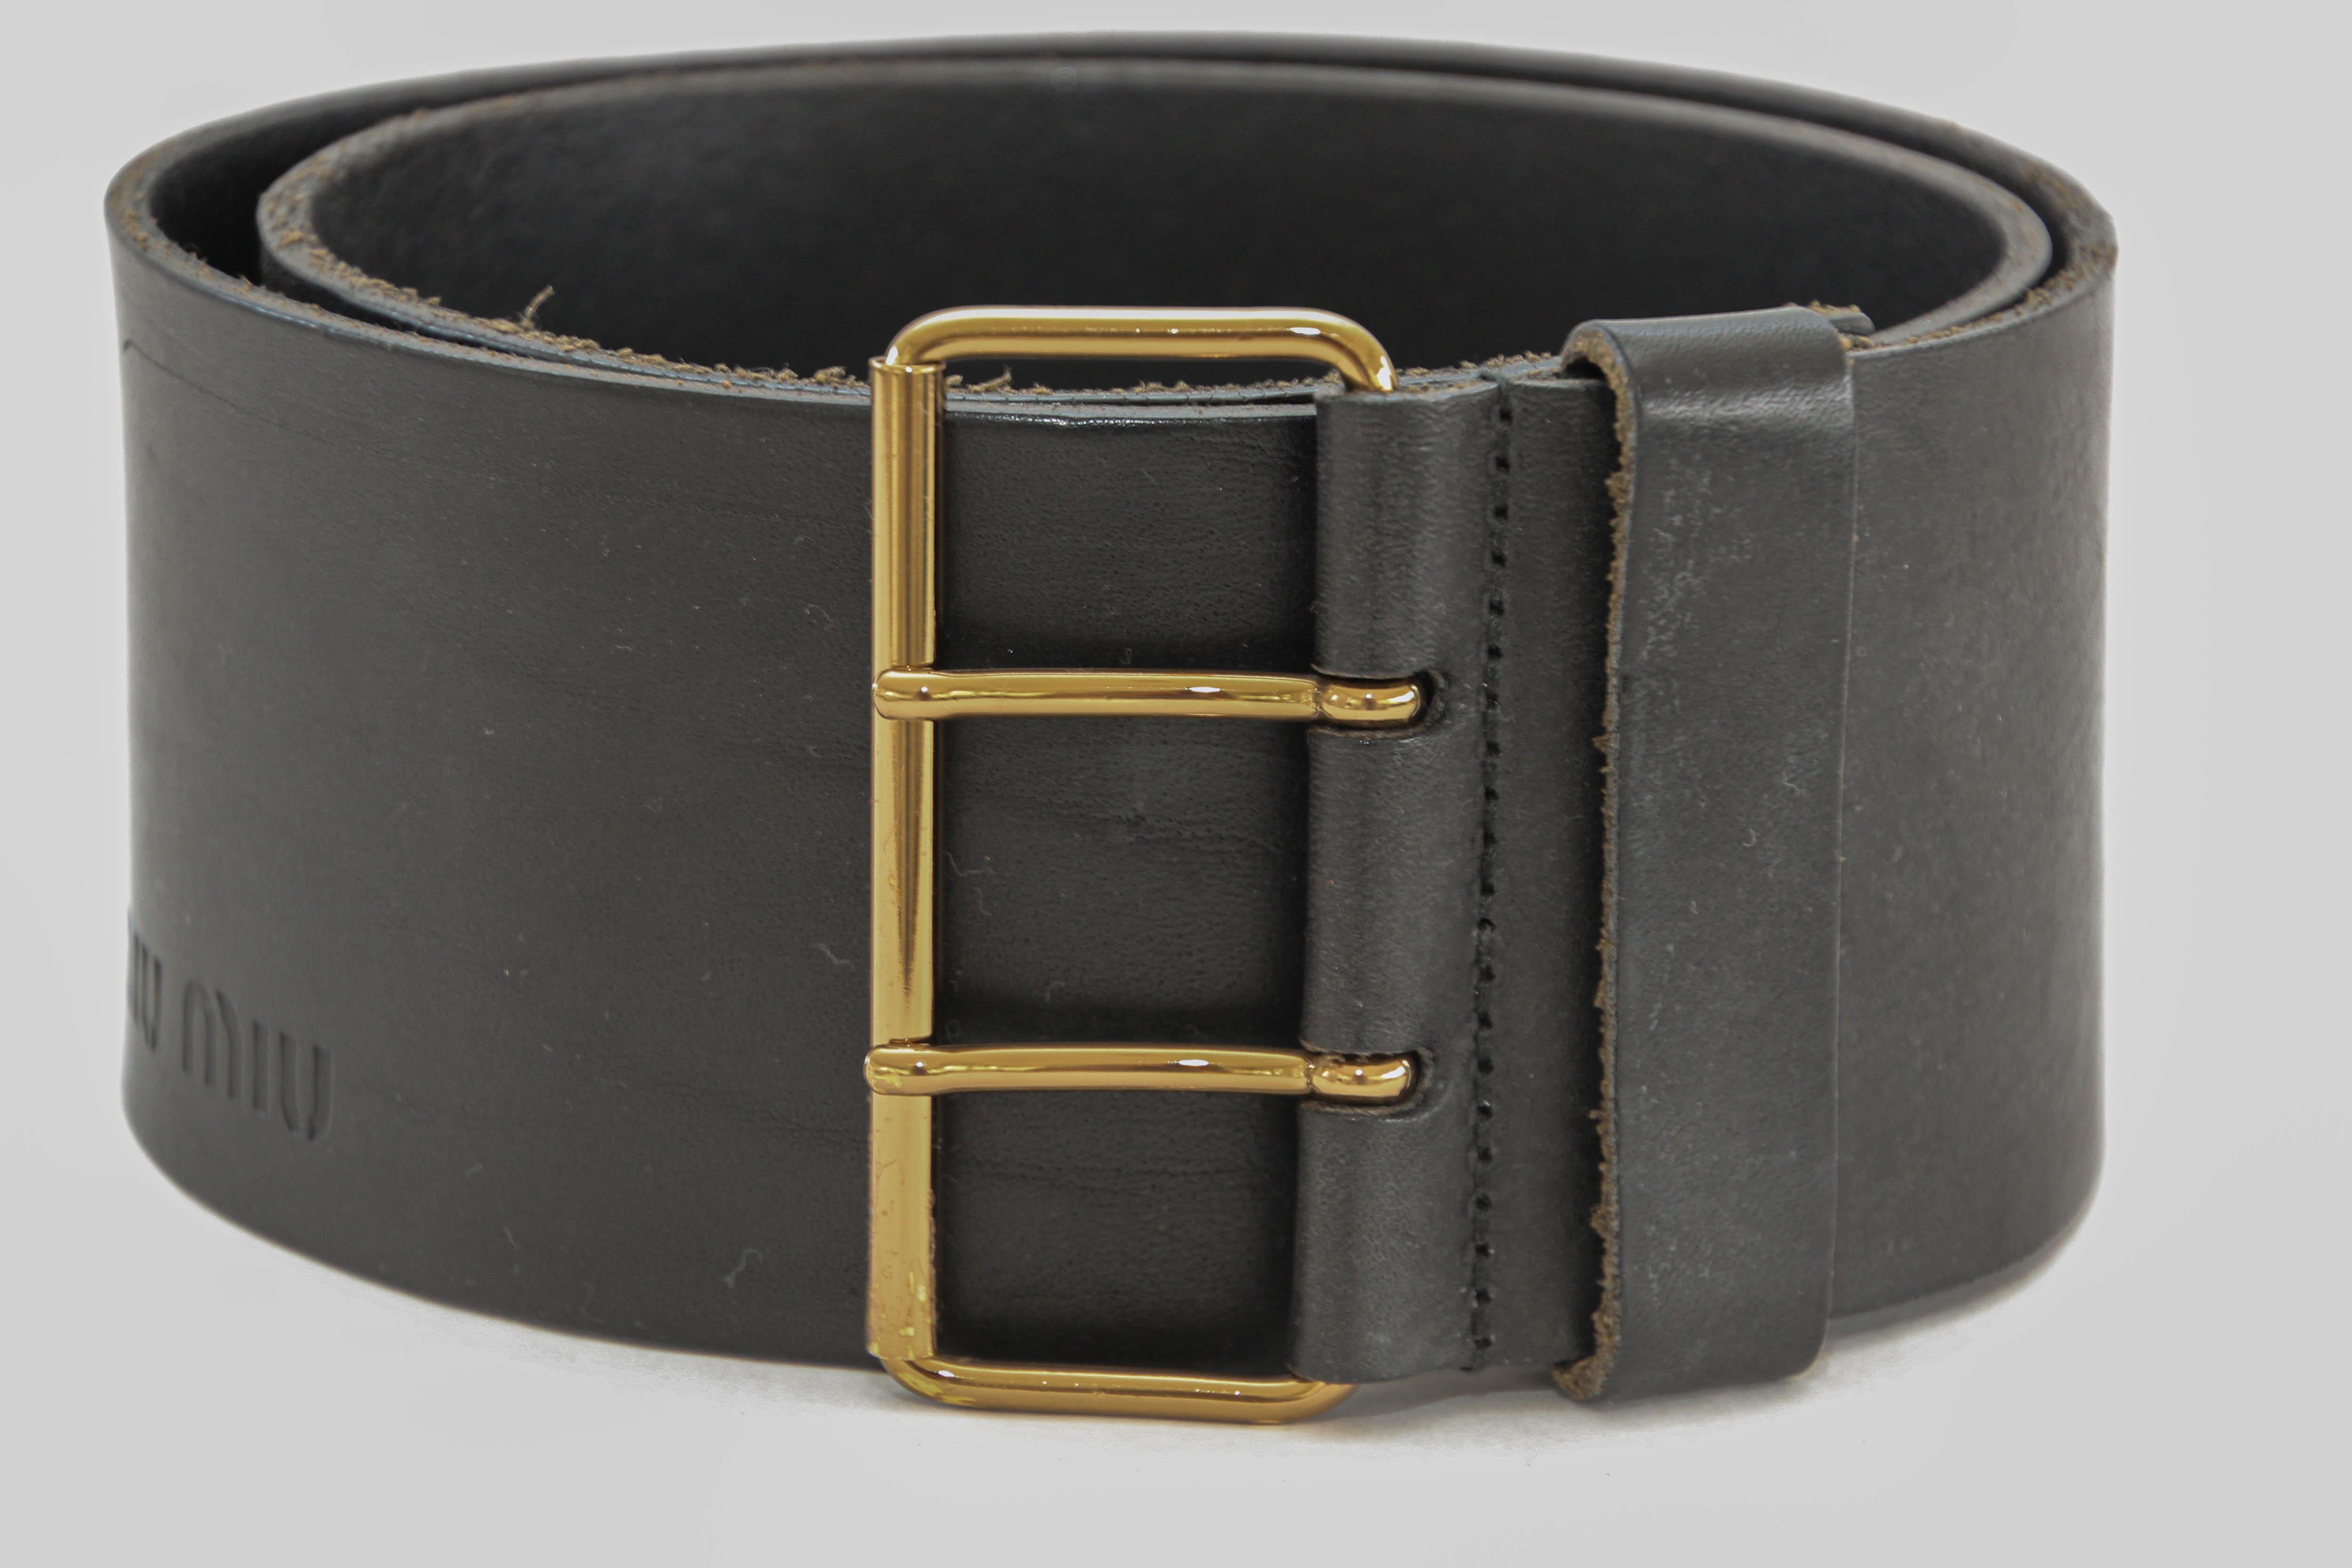 MIU MIU Oversized Black Leather Wide Waist Belt.
This Miu Miu belt is the perfect addition to your accessory collection. Crafted in black leather, this oversized waist belt will provide you with enough to glam up any basic outfit.
Luxury wide